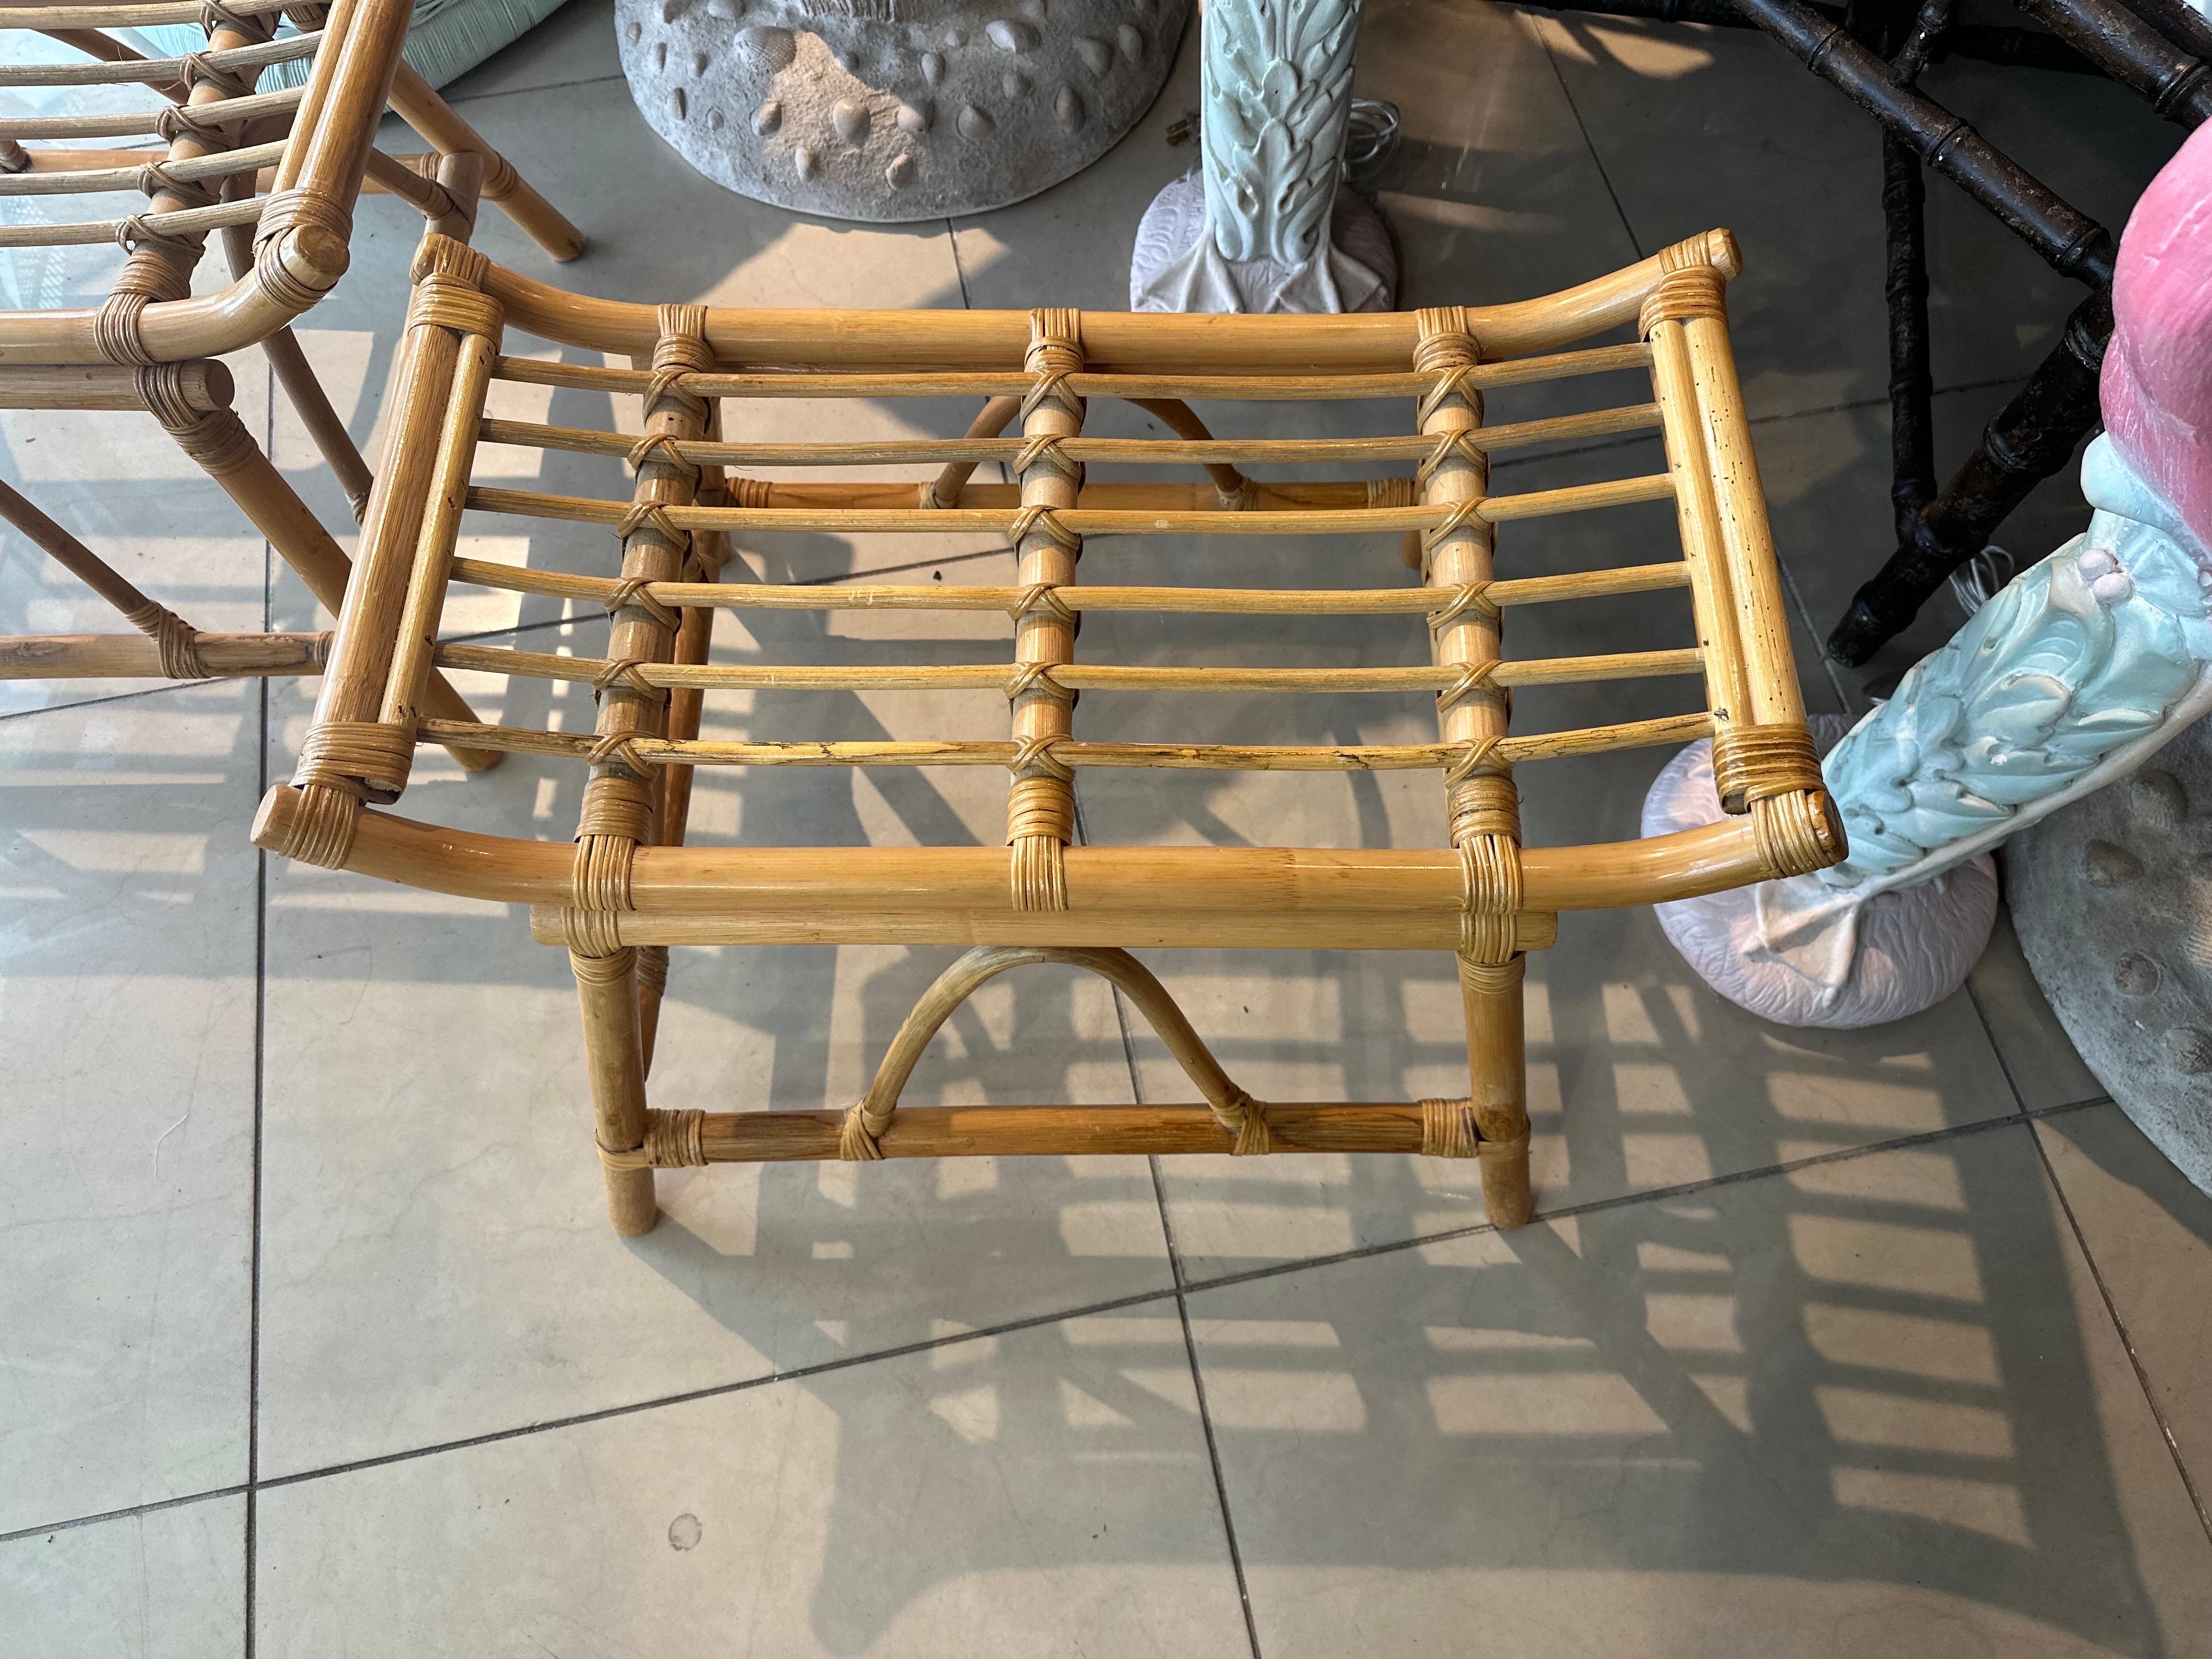 Lovely pair of vintage rattan bamboo pagoda benches stools ottomans footstools. No damage or defects. Original vintage natural finish. Ready to add your cushion. Dimensions: 14.5 H x 24 W x 18.5 D. Seat Height 13.